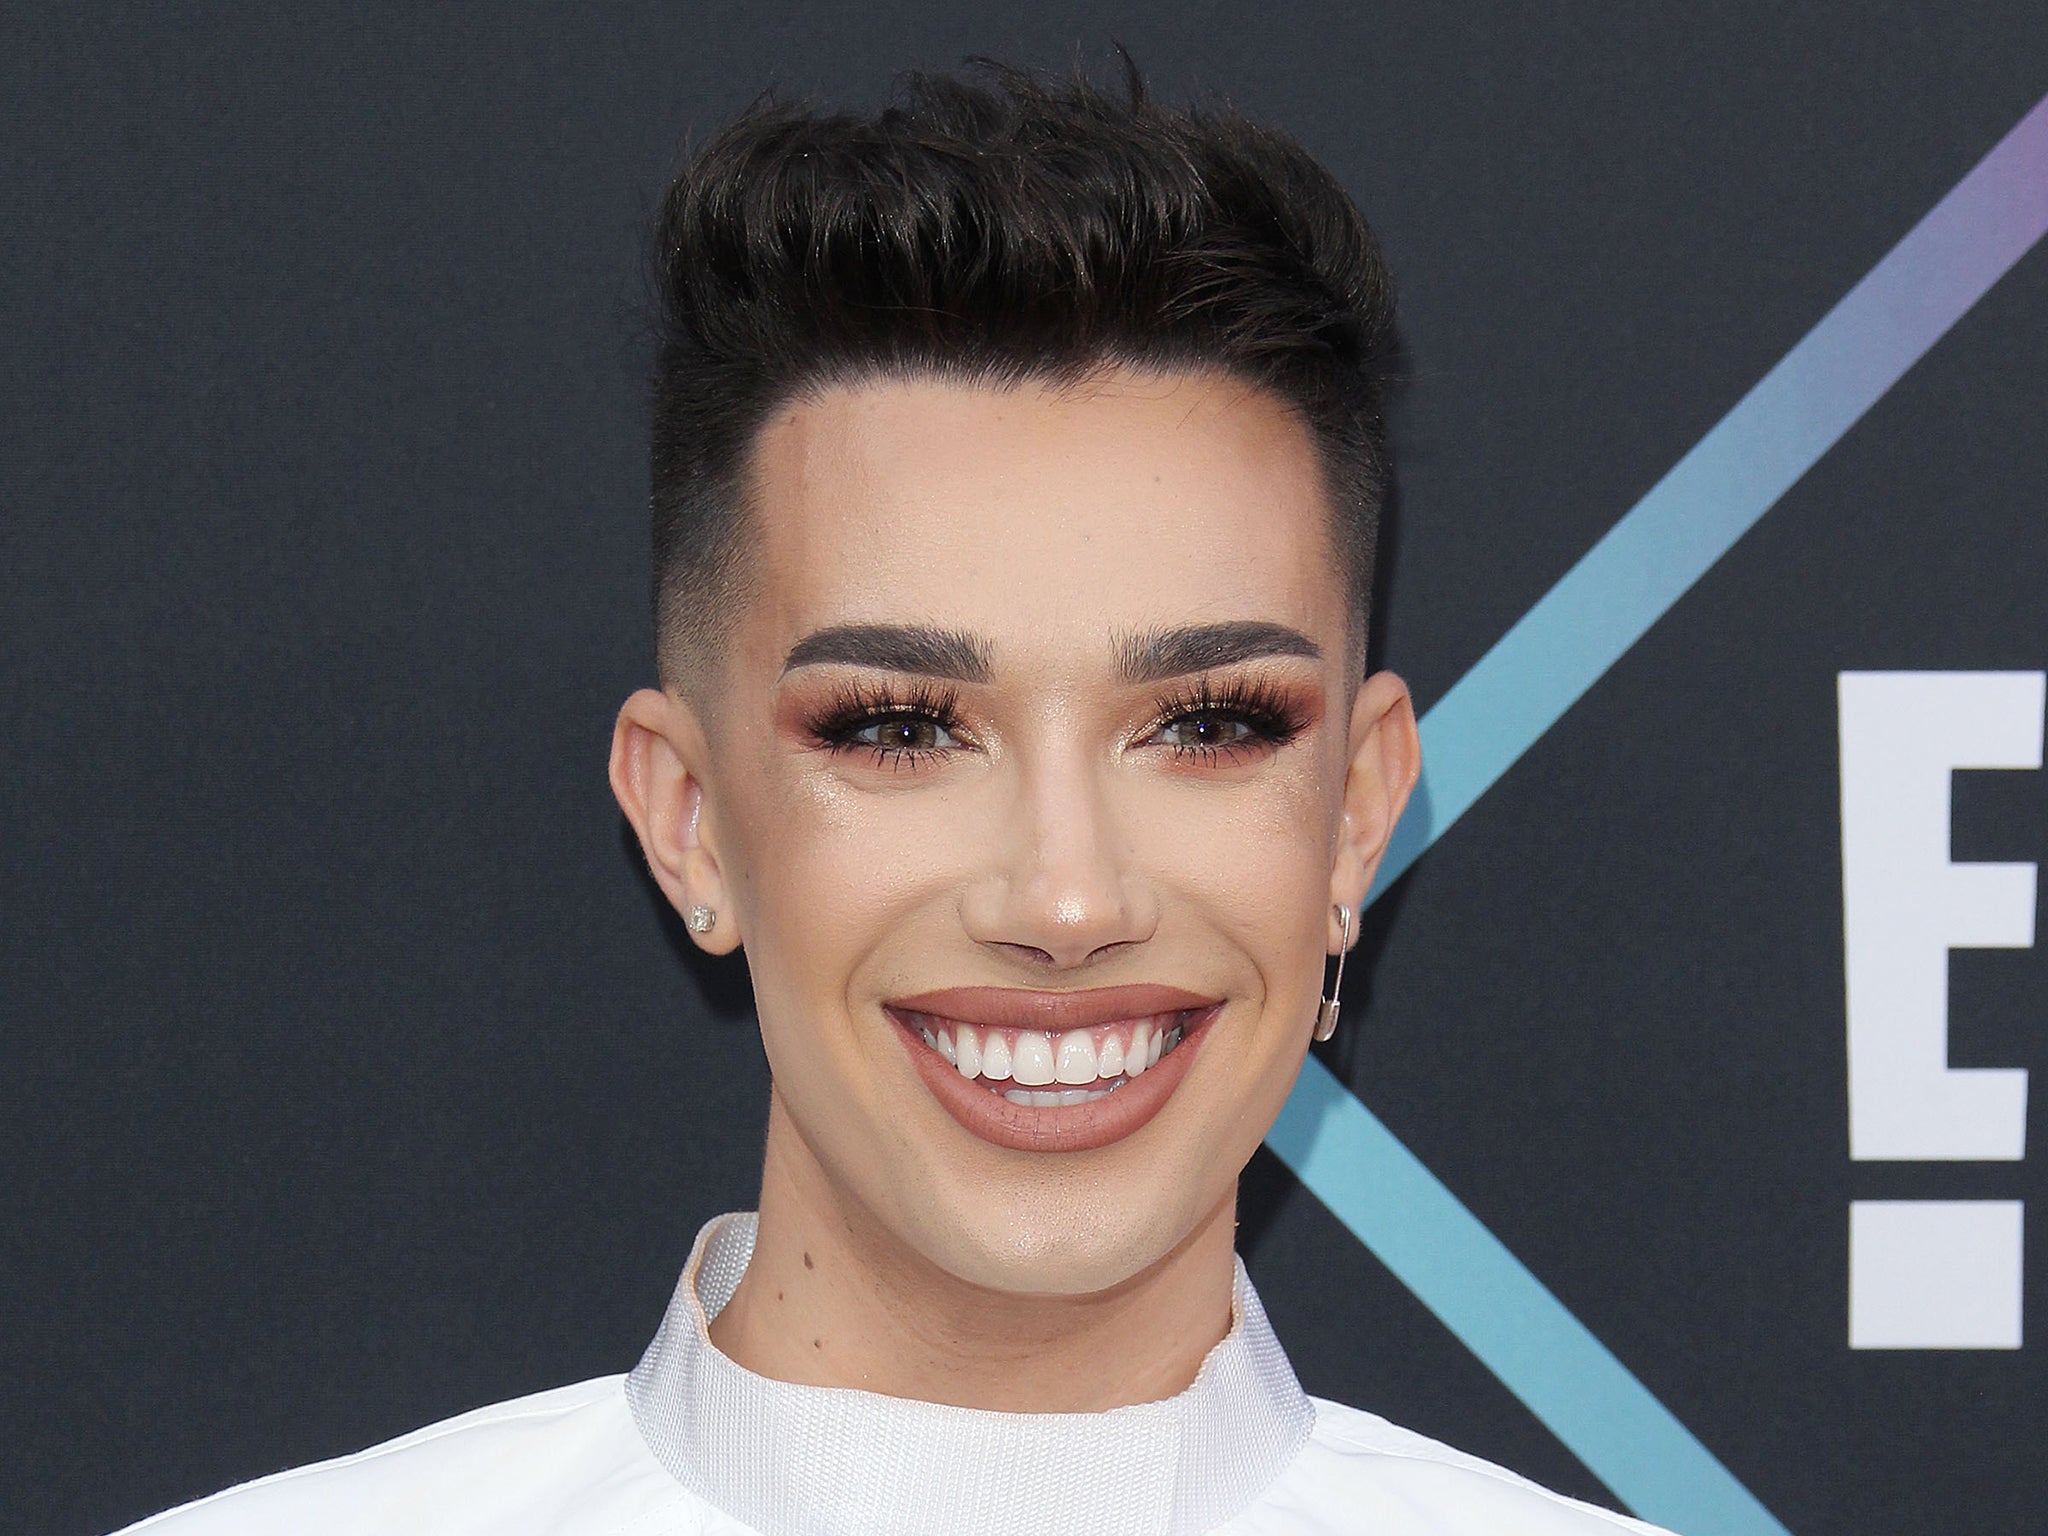 James charles ended his youtube hiatus to announce a donation to the trevor...